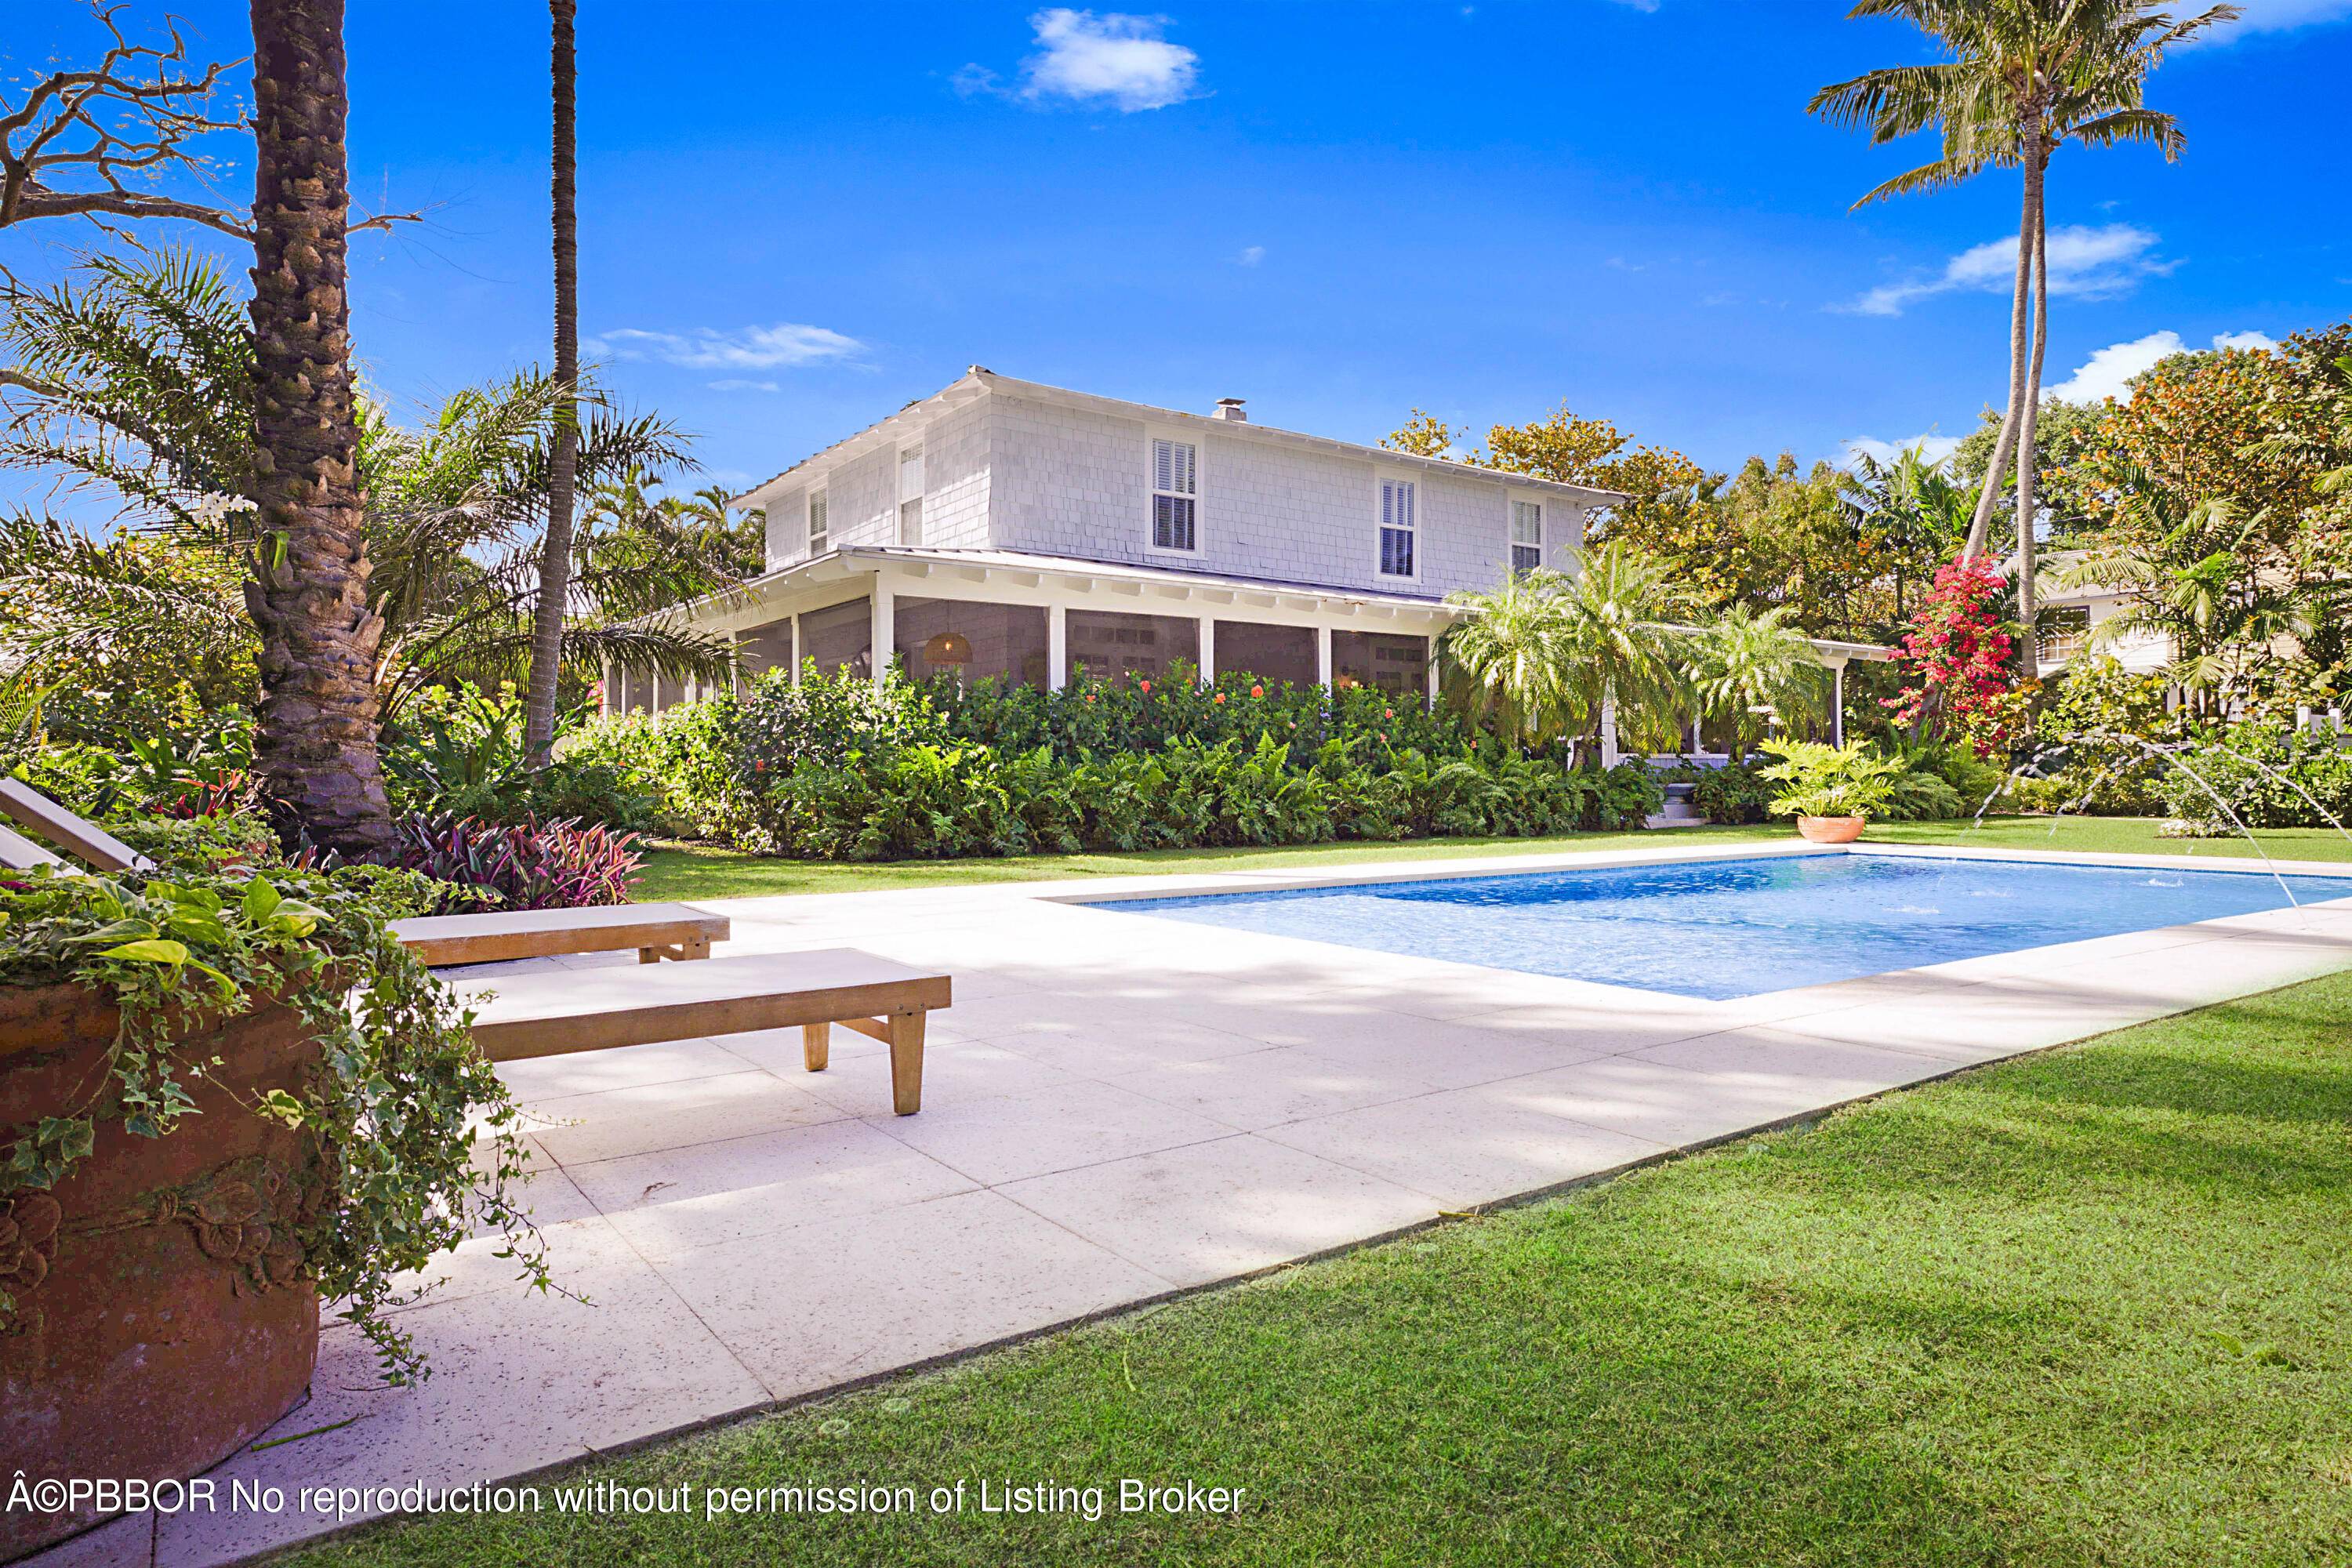 Welcome to 3402 Floral Ave, a stunning Montauk style 4bedroom 4bath home tucked away on a tranquil estate size lot a block from N Flagler in the coveted North Shores ...